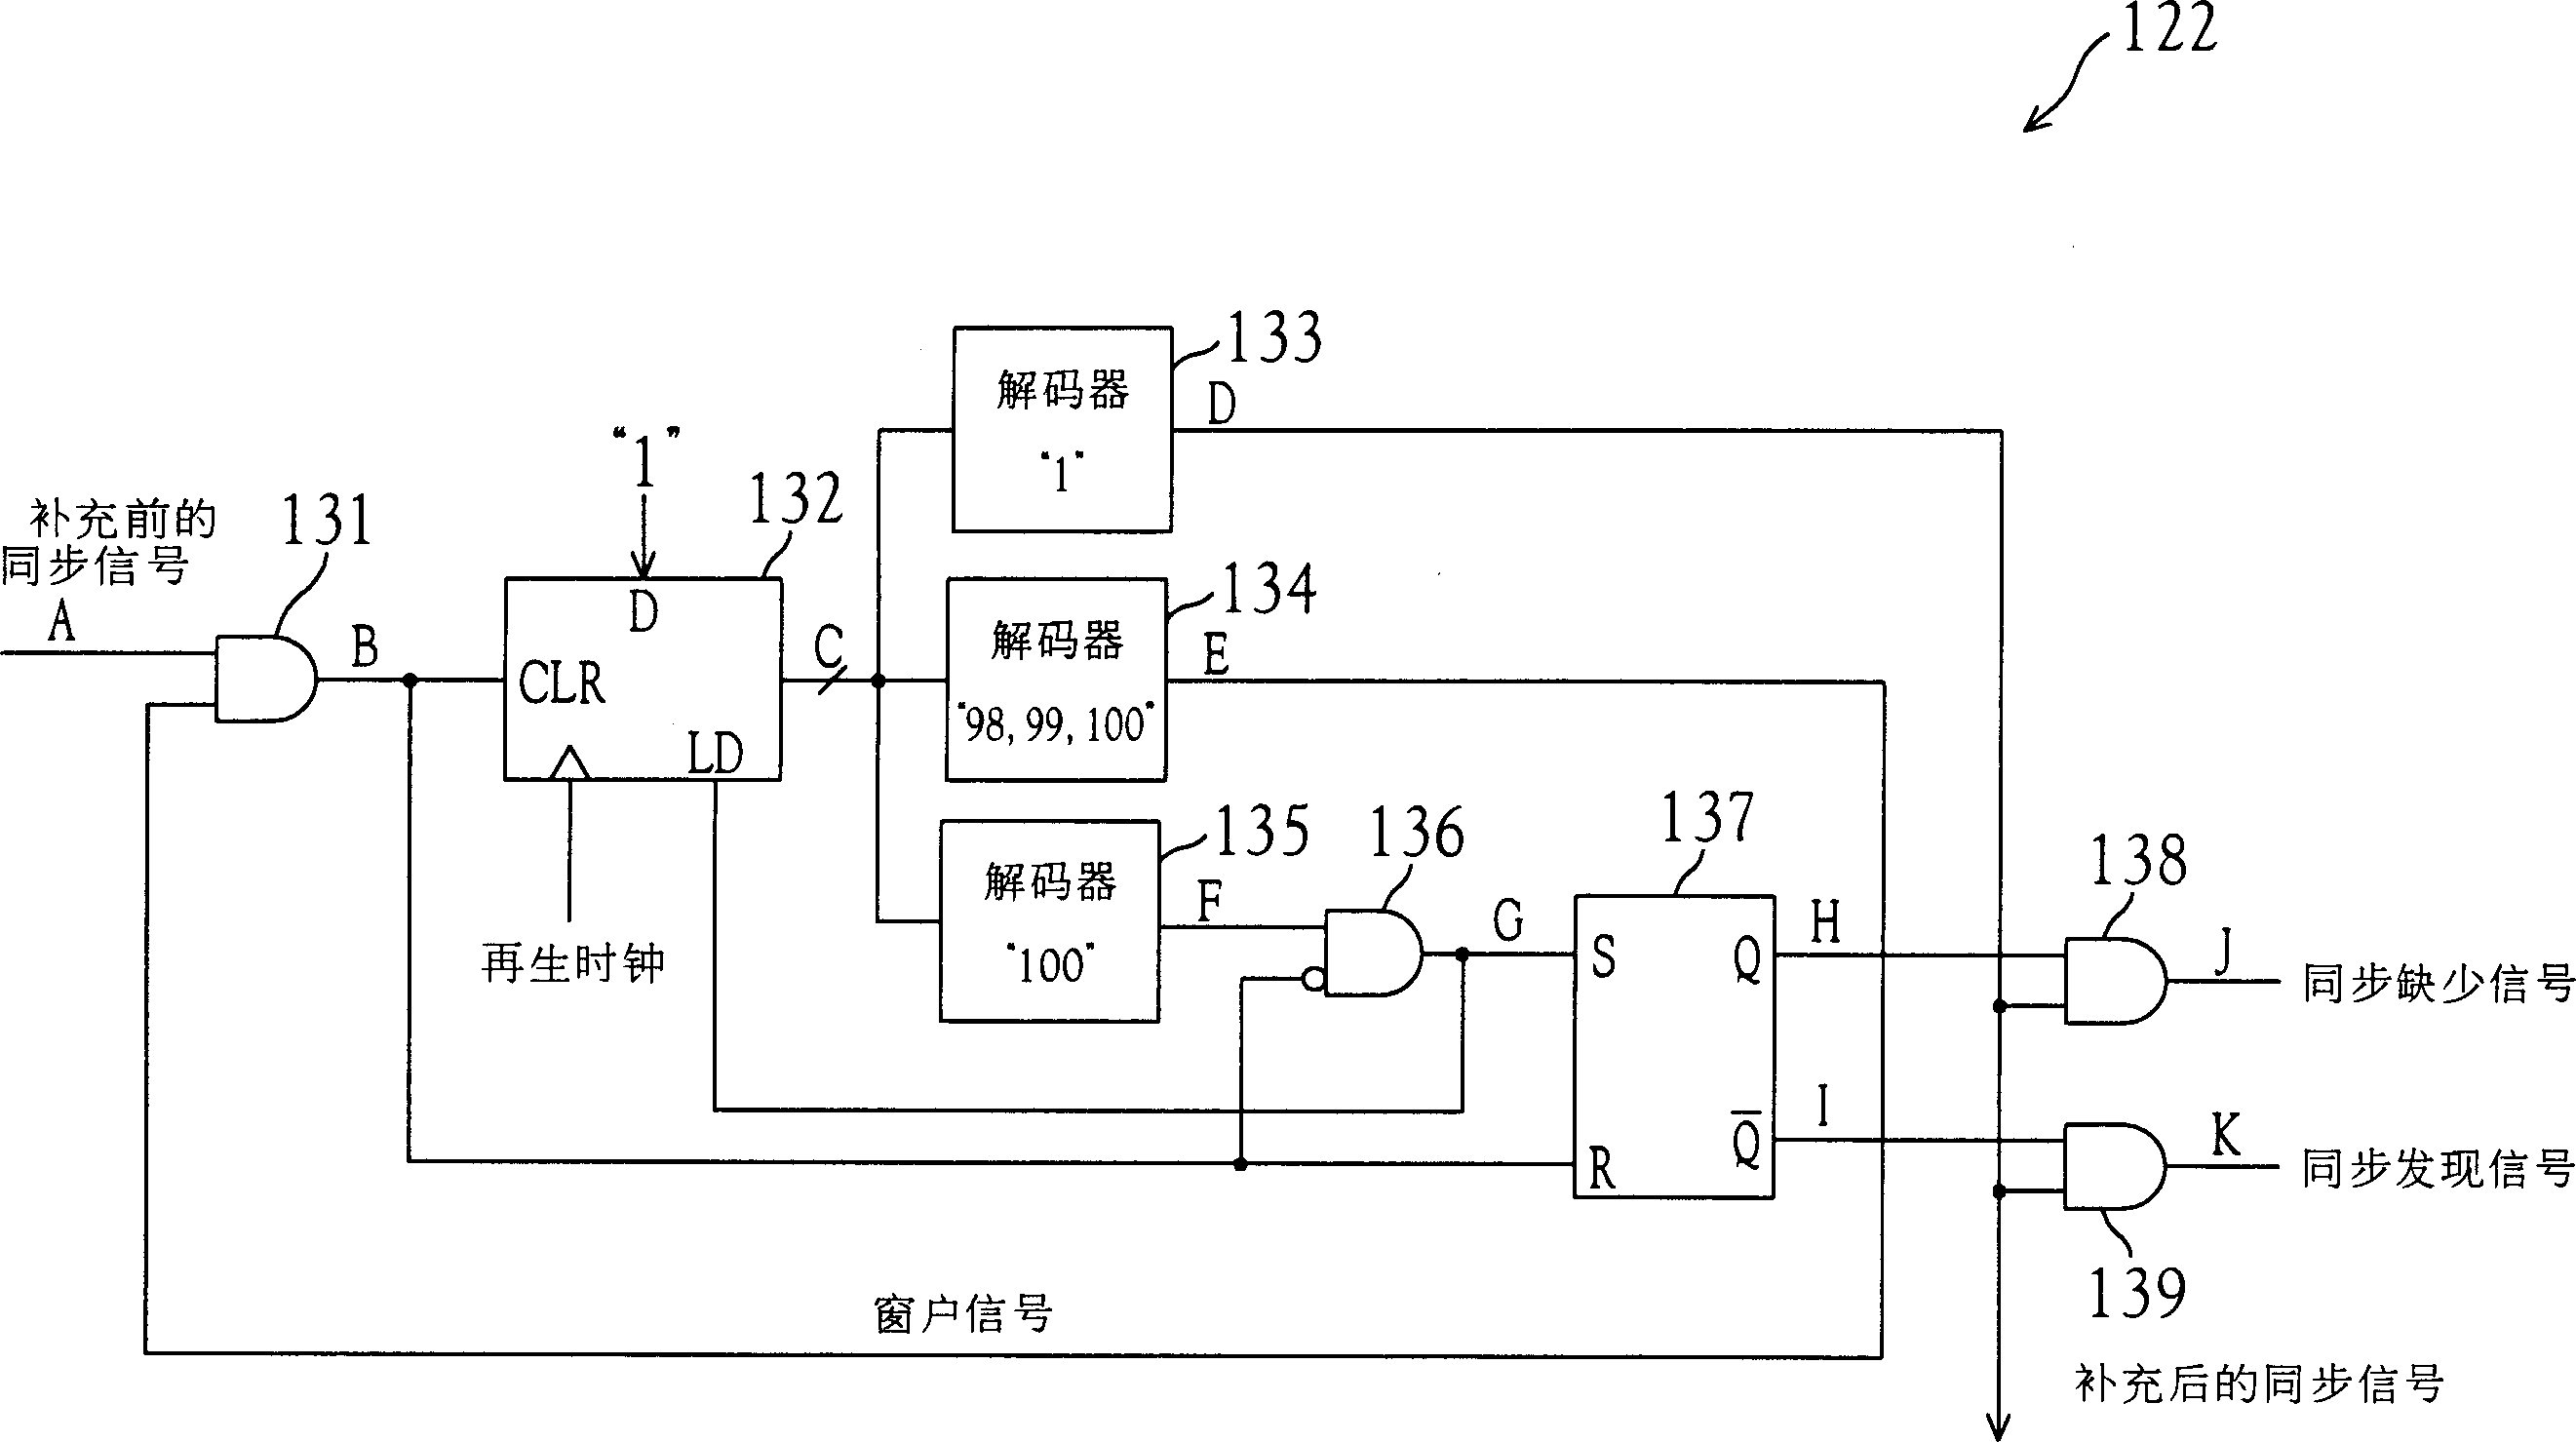 Date recording device, controlling device for data recording device and data recording method